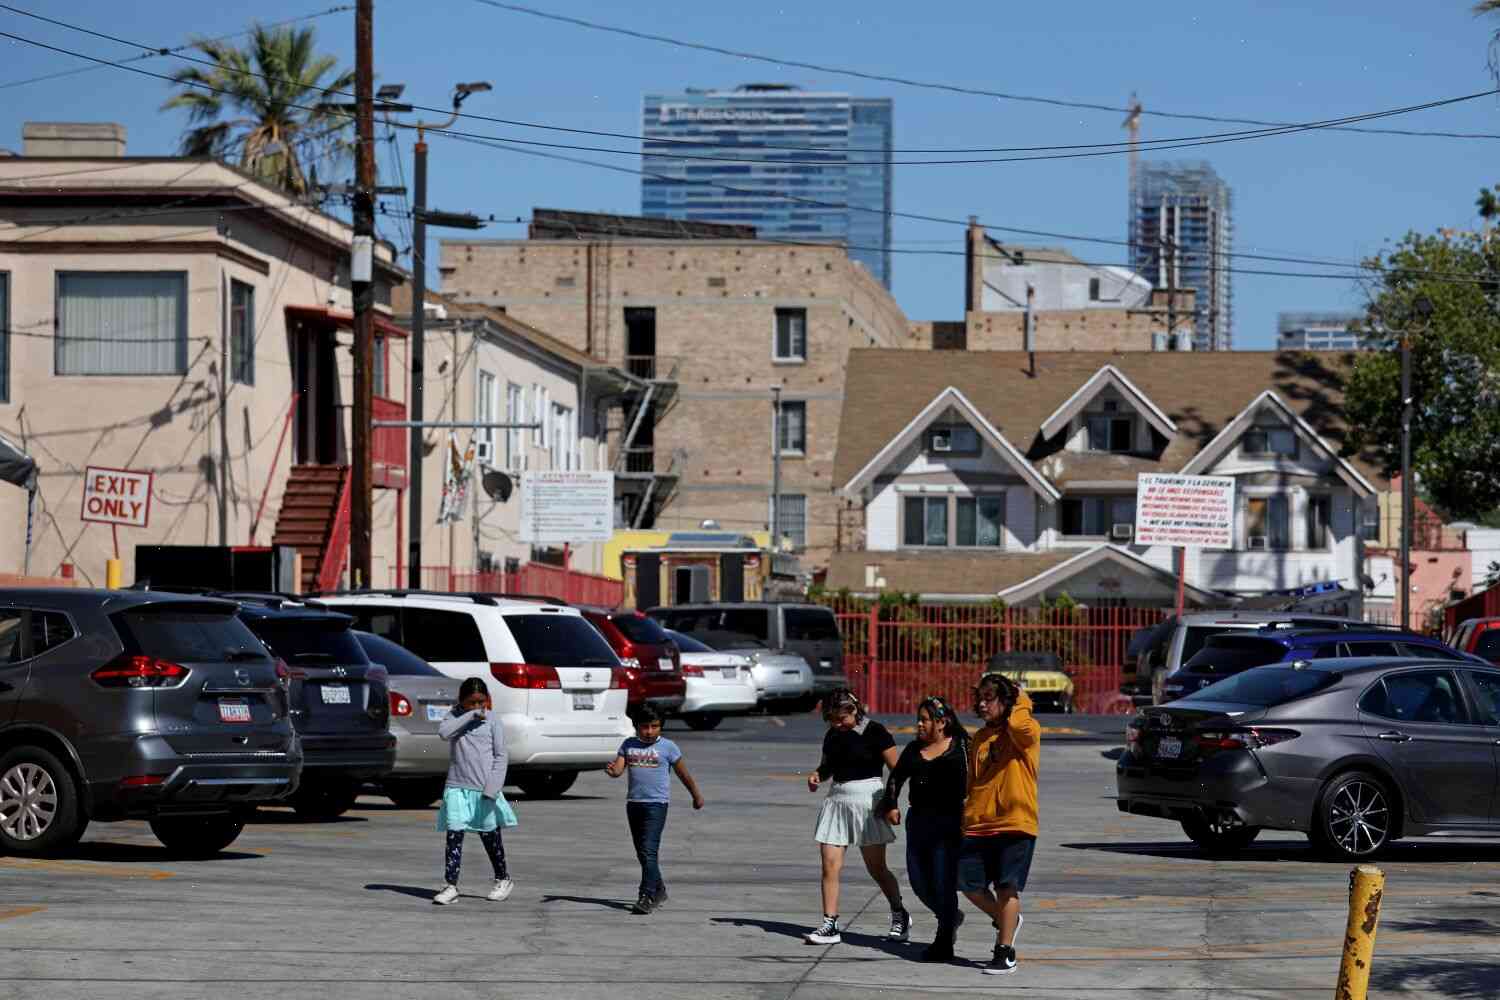 The Los Angeles Housing Crisis